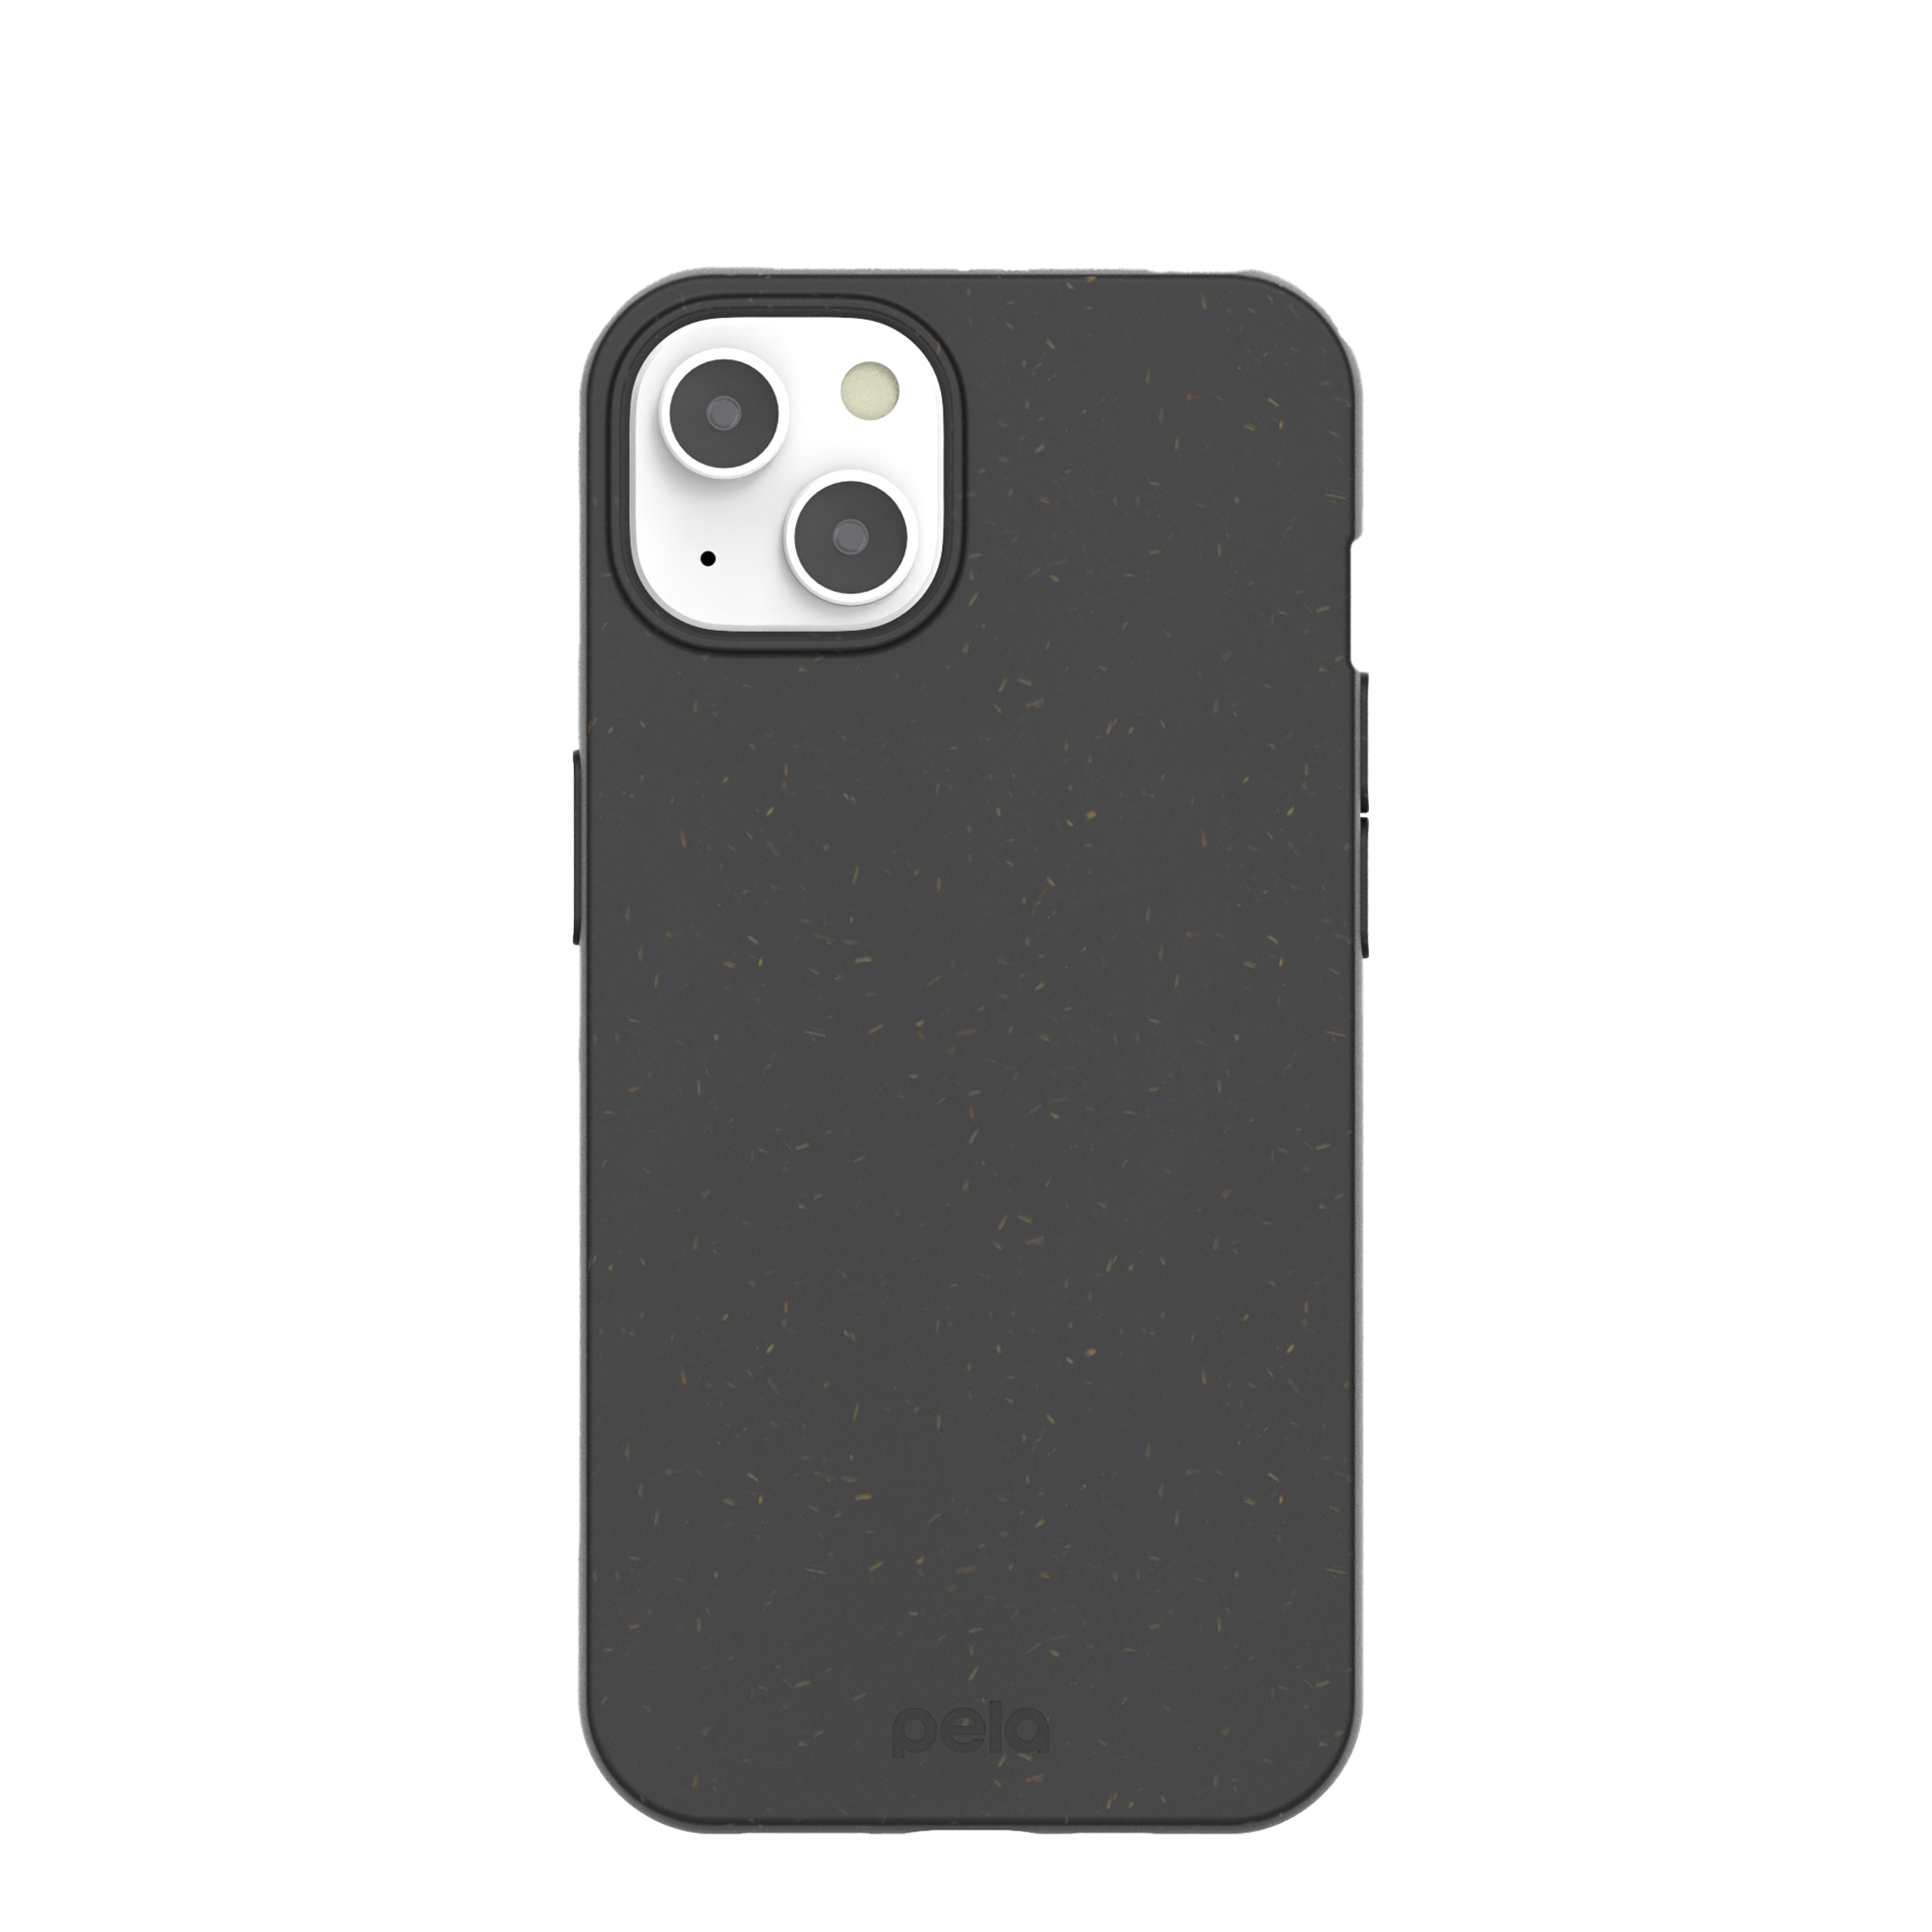 Black smartphone case with camera cutouts on a white background.